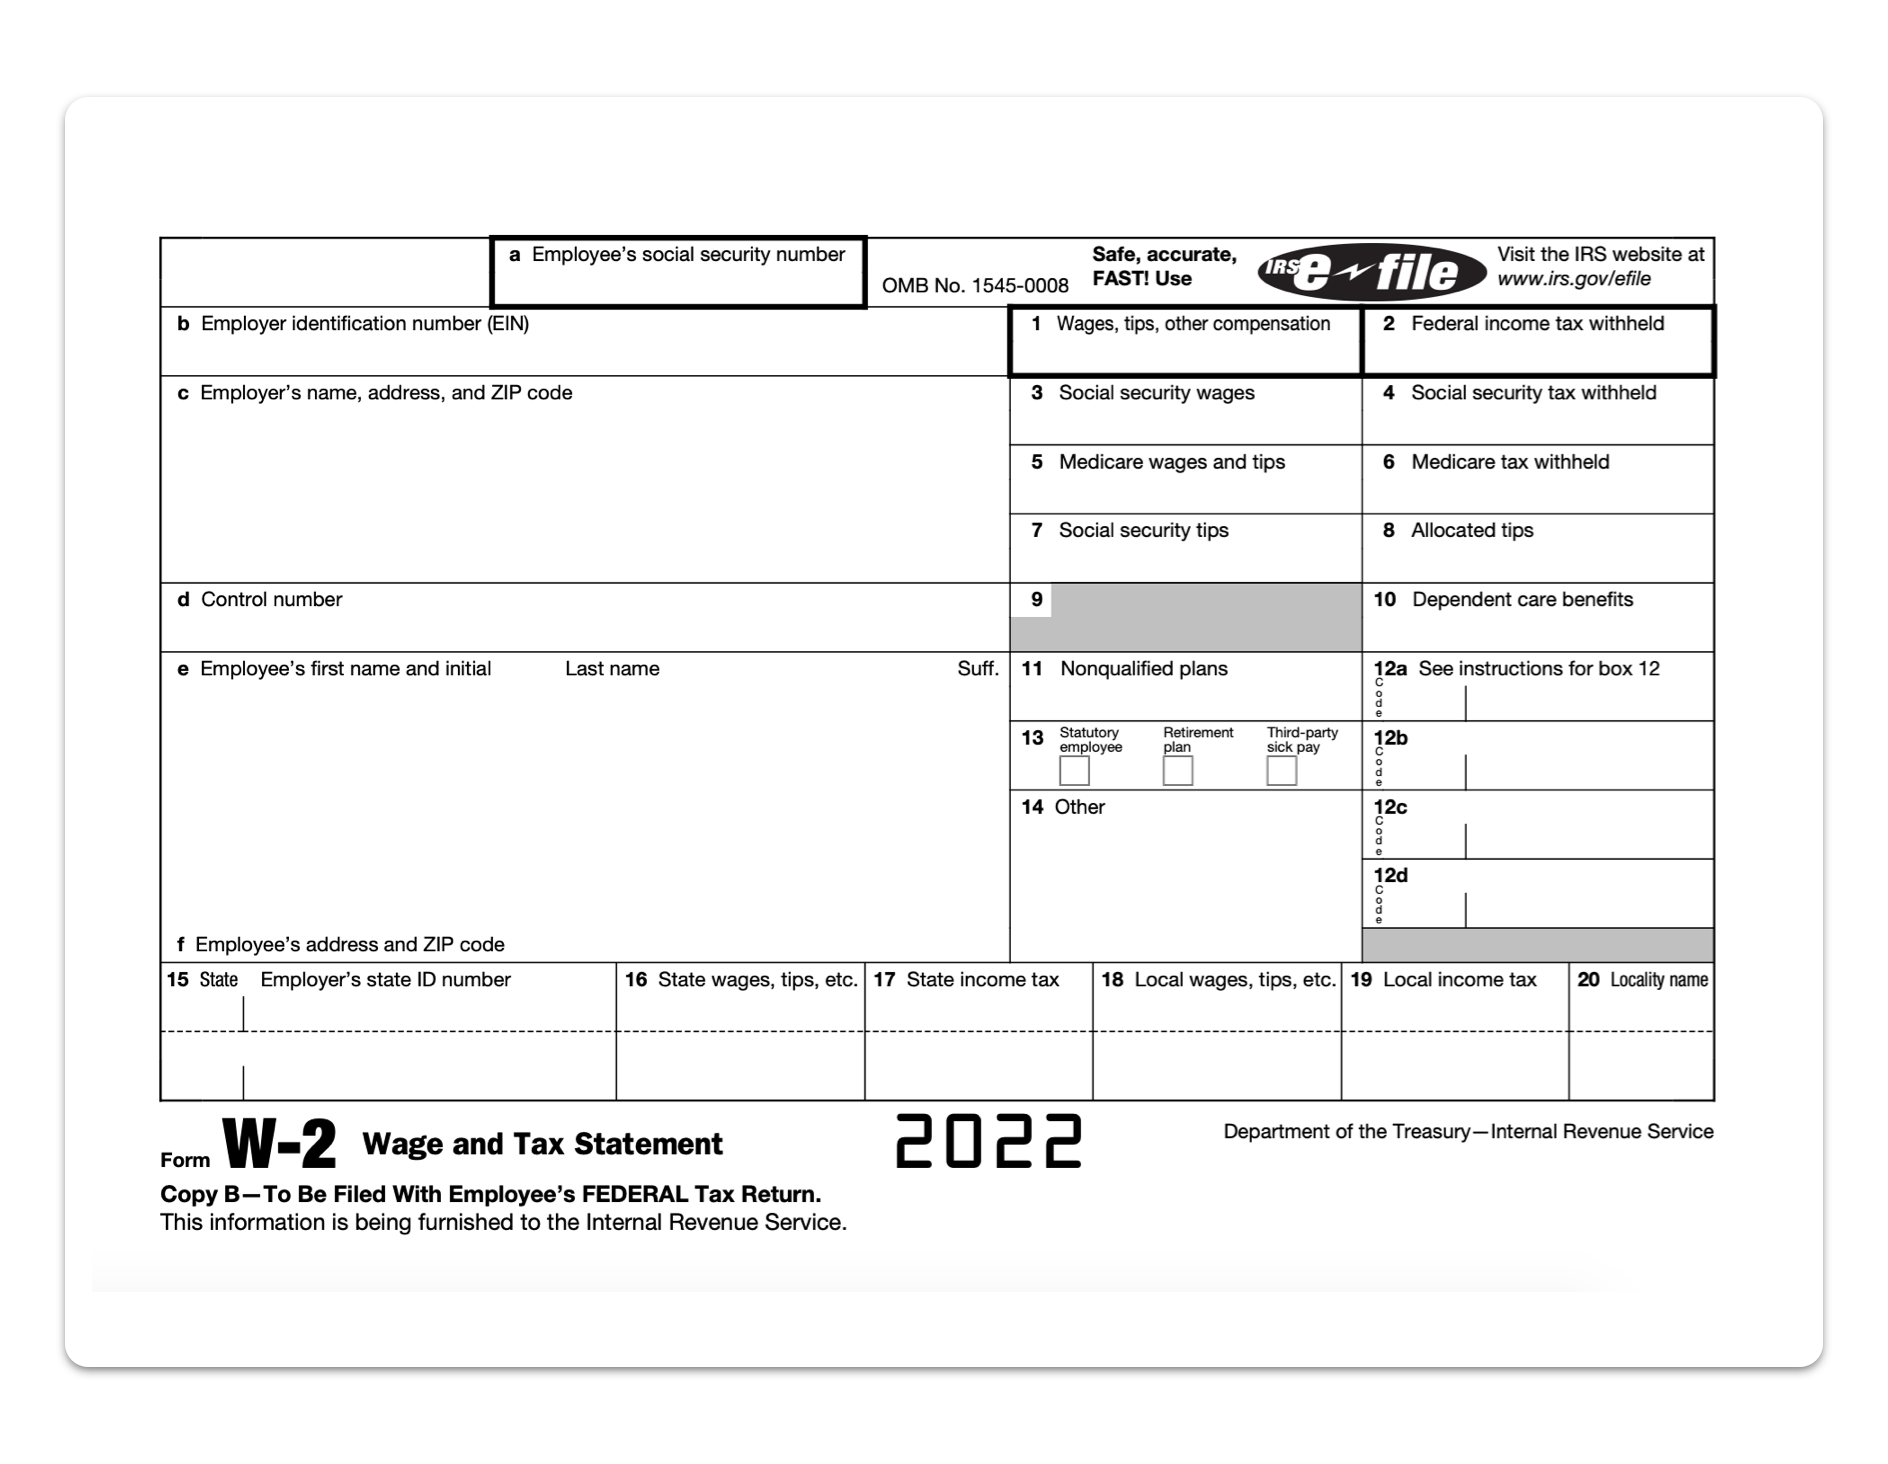 Your Guide To The W-2 Form: Wage And Tax Statement - Hourly, Inc. with Empty W2 Form